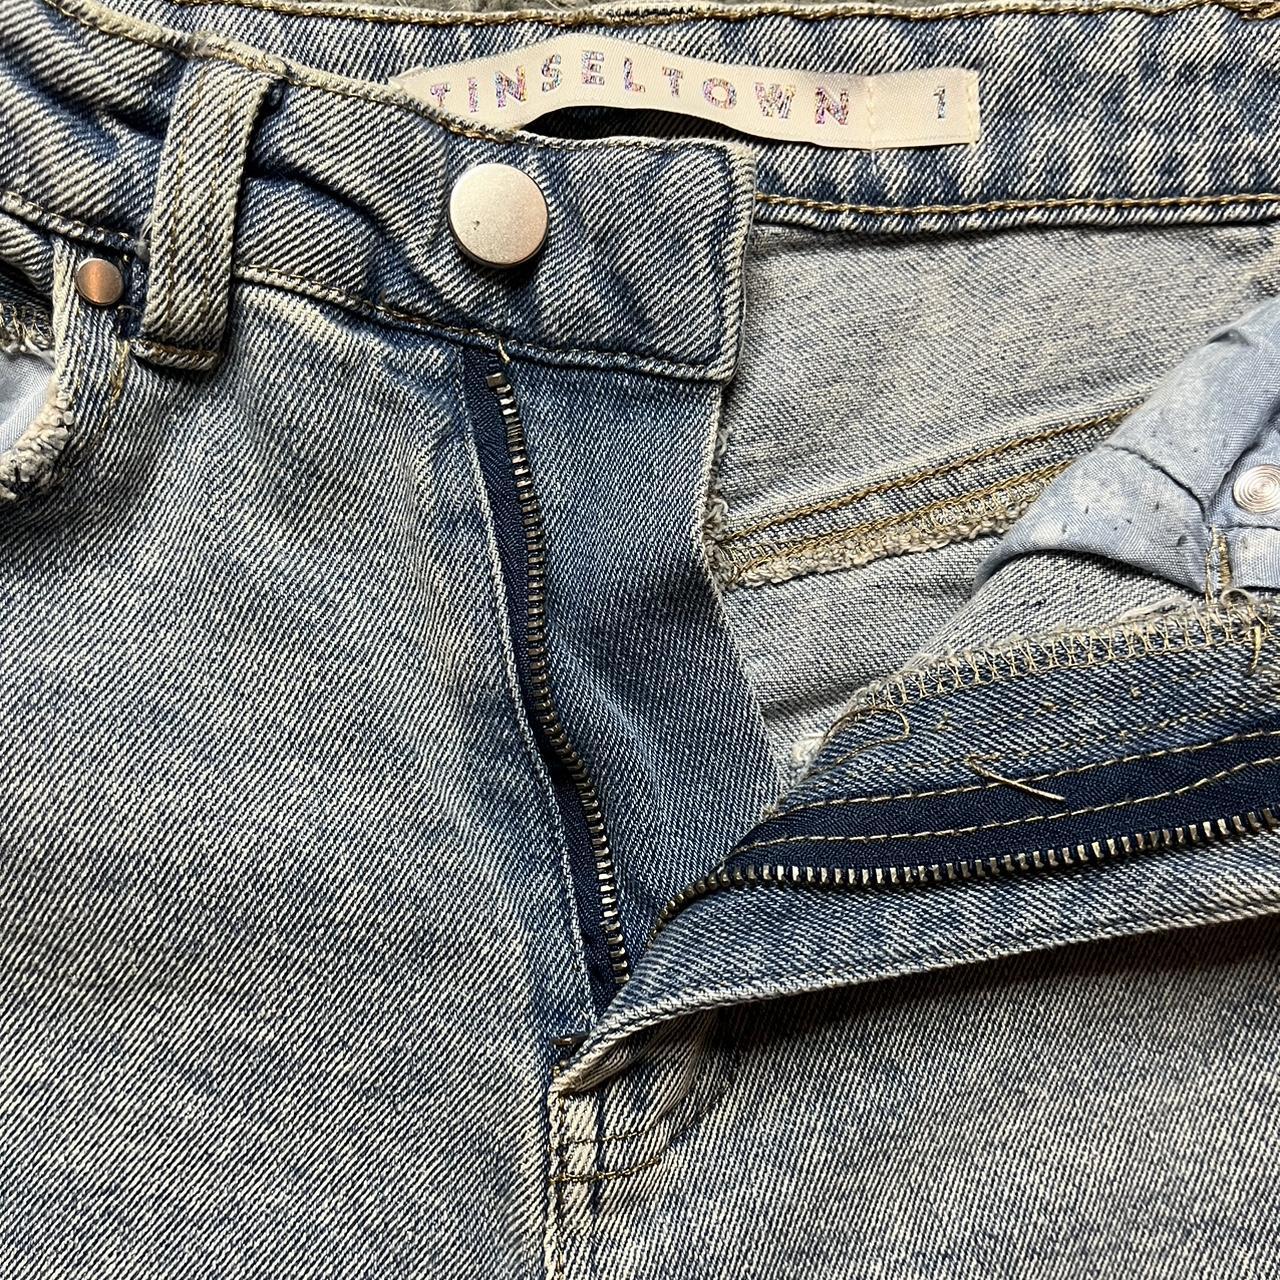 tinseltown high waisted jeans from tj maxx never... - Depop